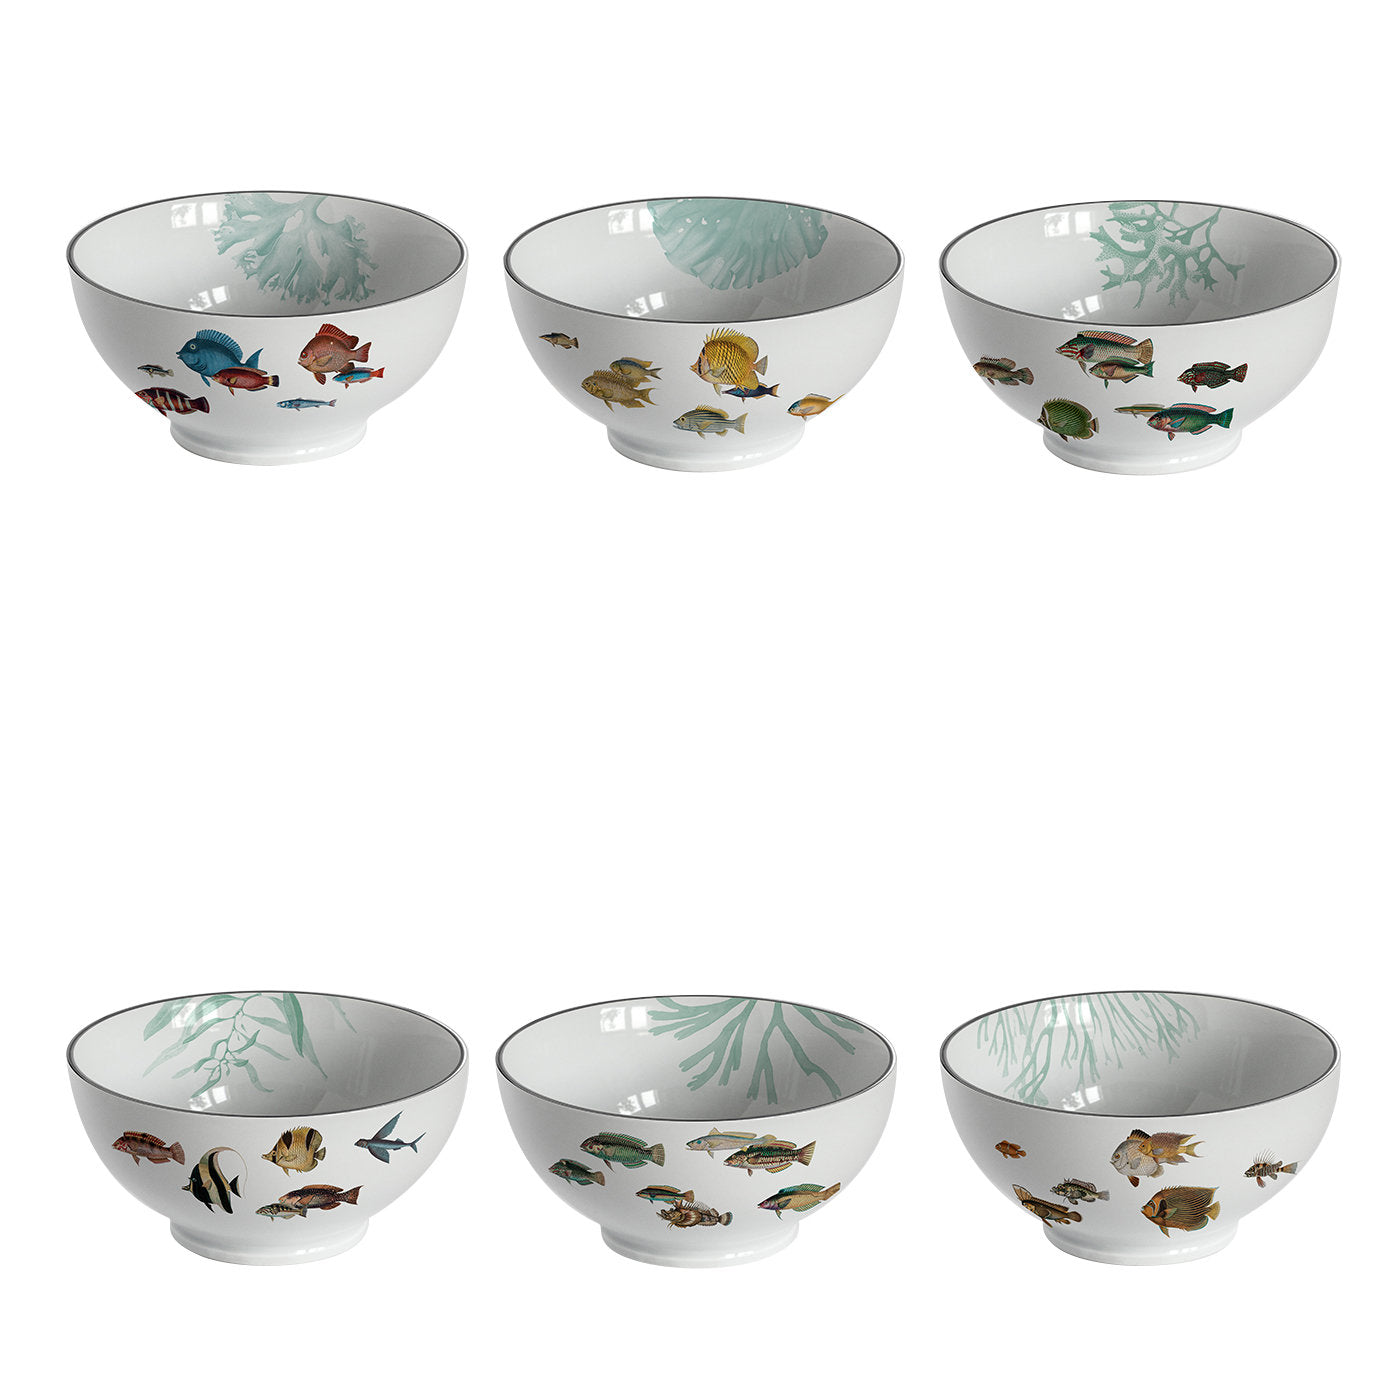 Amami Set Of 6 Porcelain Bowls With Tropical Fish - Main view